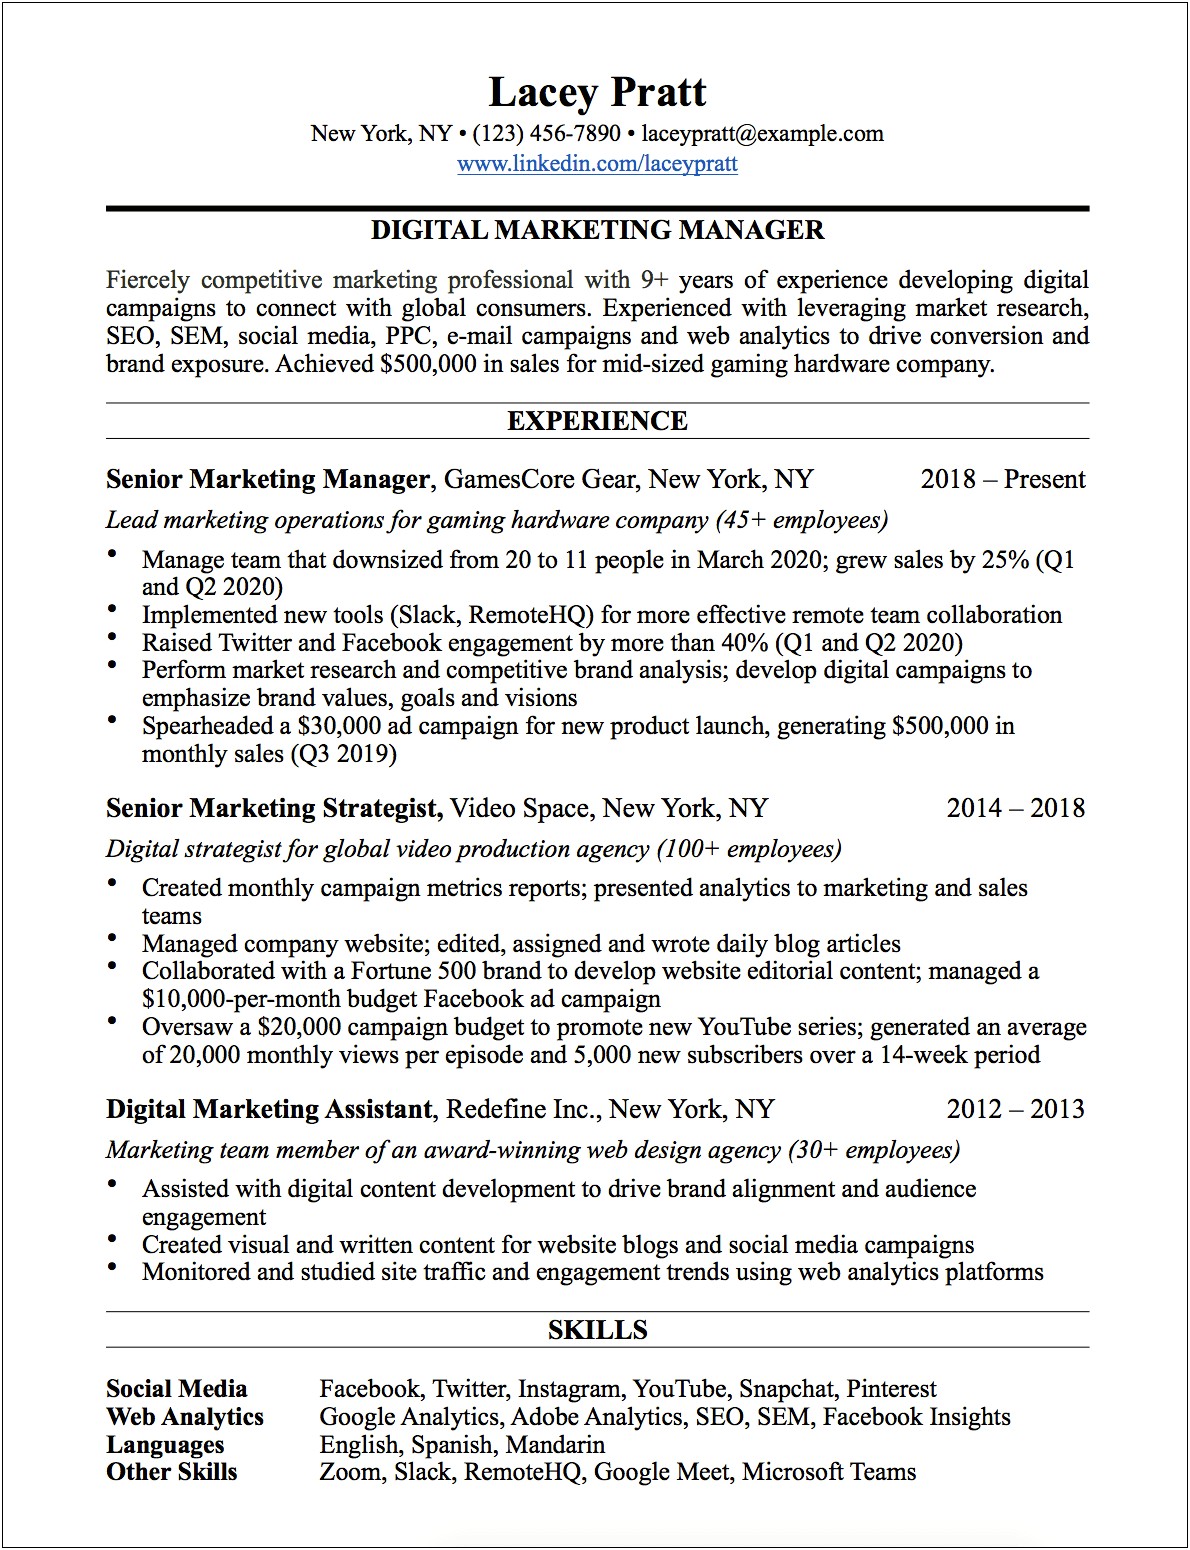 Examples Of Resumes With Management